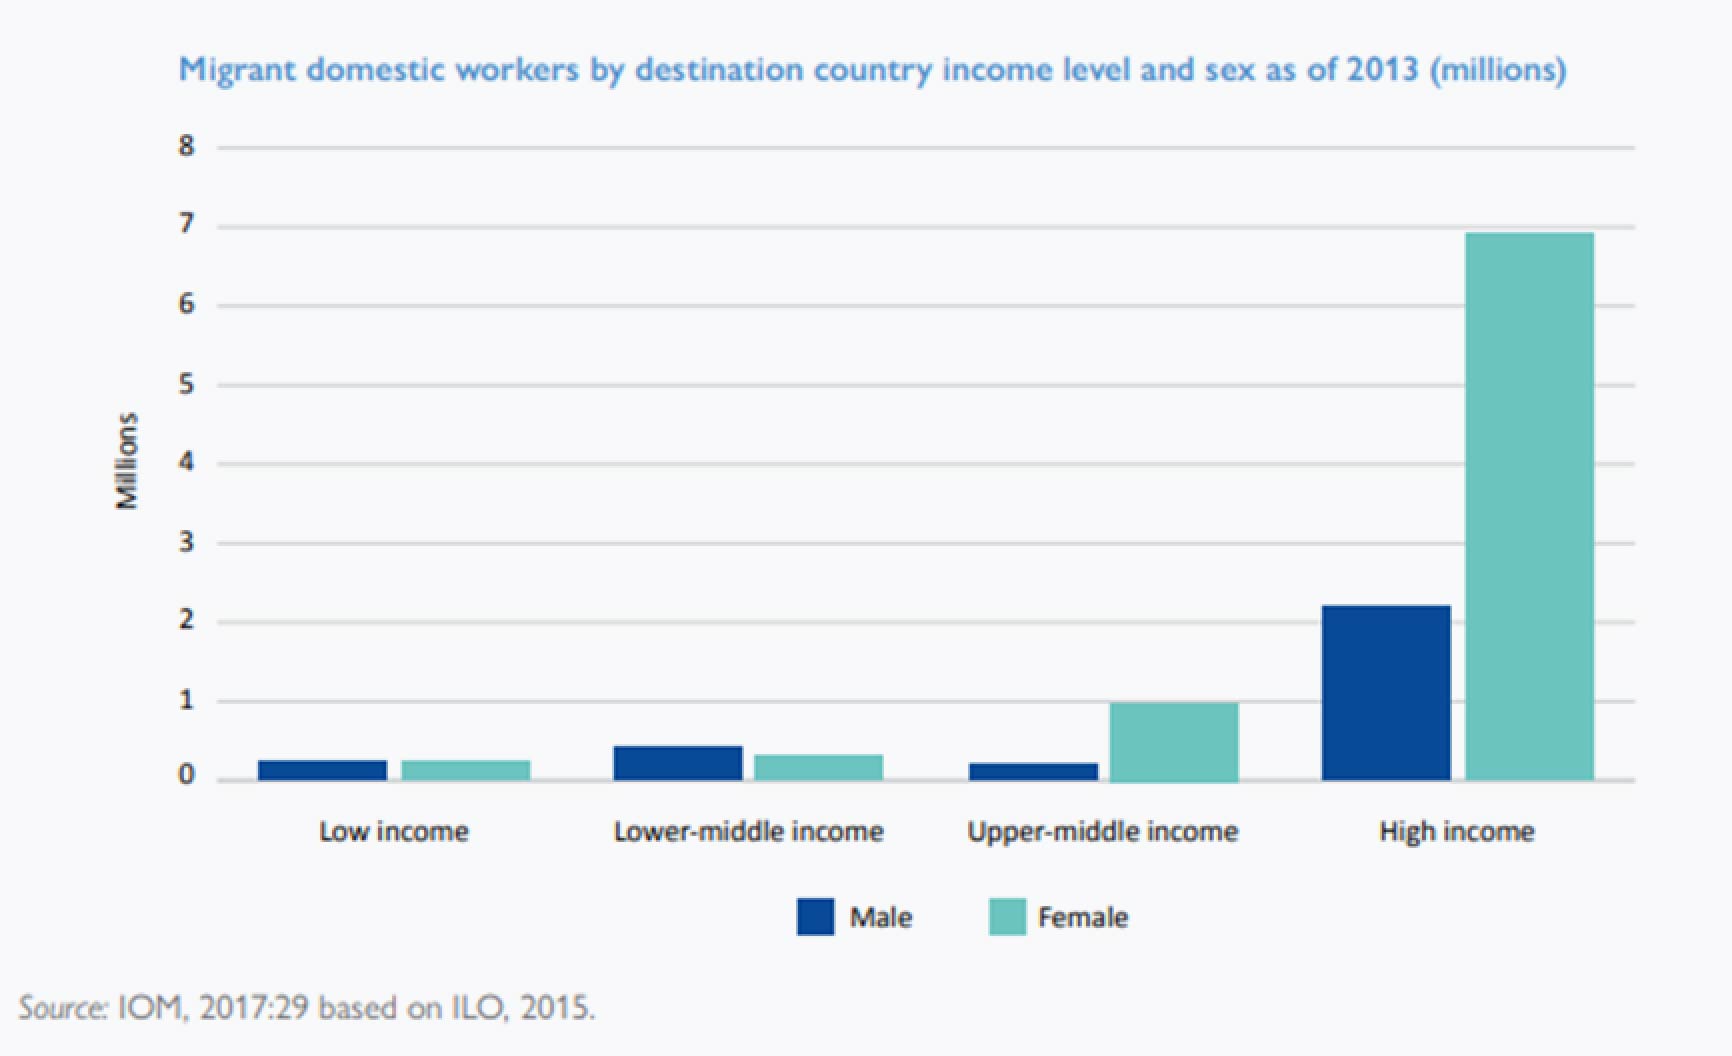 Migrant domestic workers by destination country income level and sex as of 2013